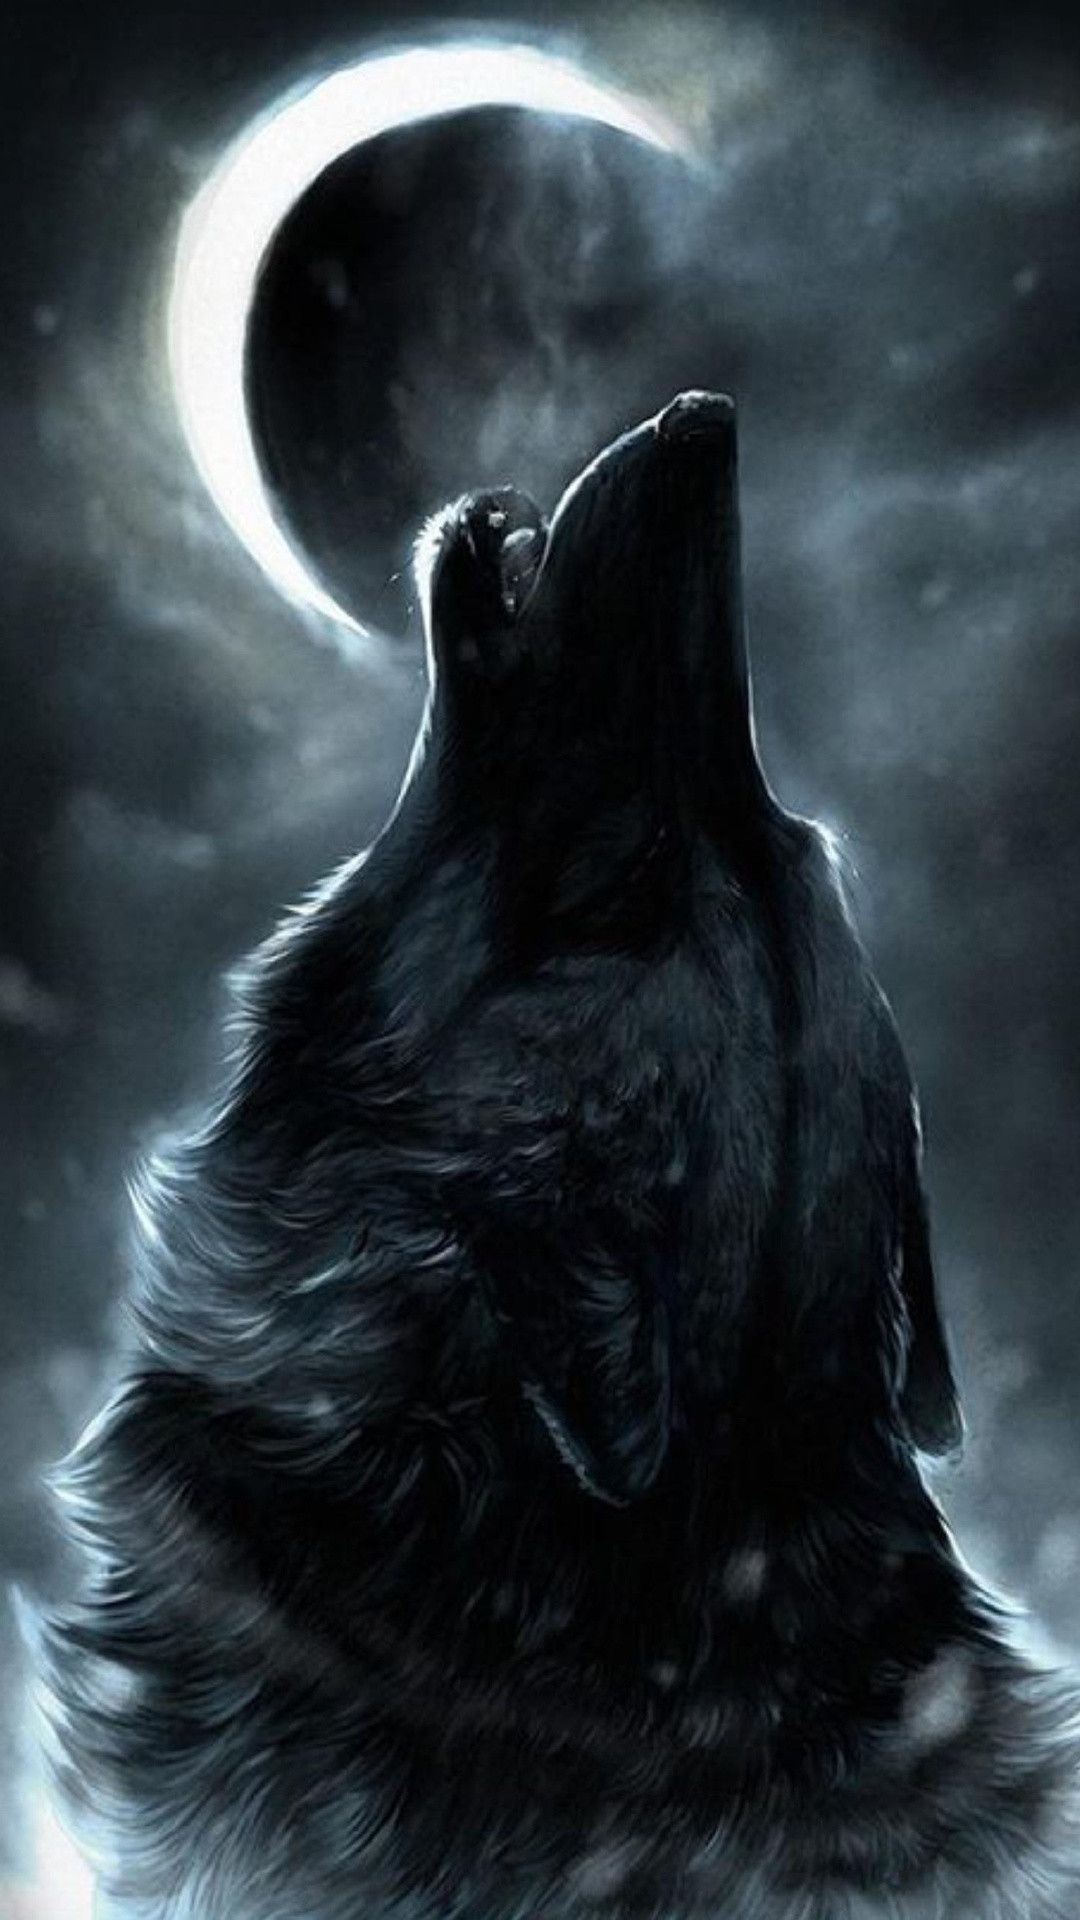 Epic Wolf Wallpaper Full HD Hupages Download iPhone Wallpaper. Wolf wallpaper, Wolf artwork, Wolf painting